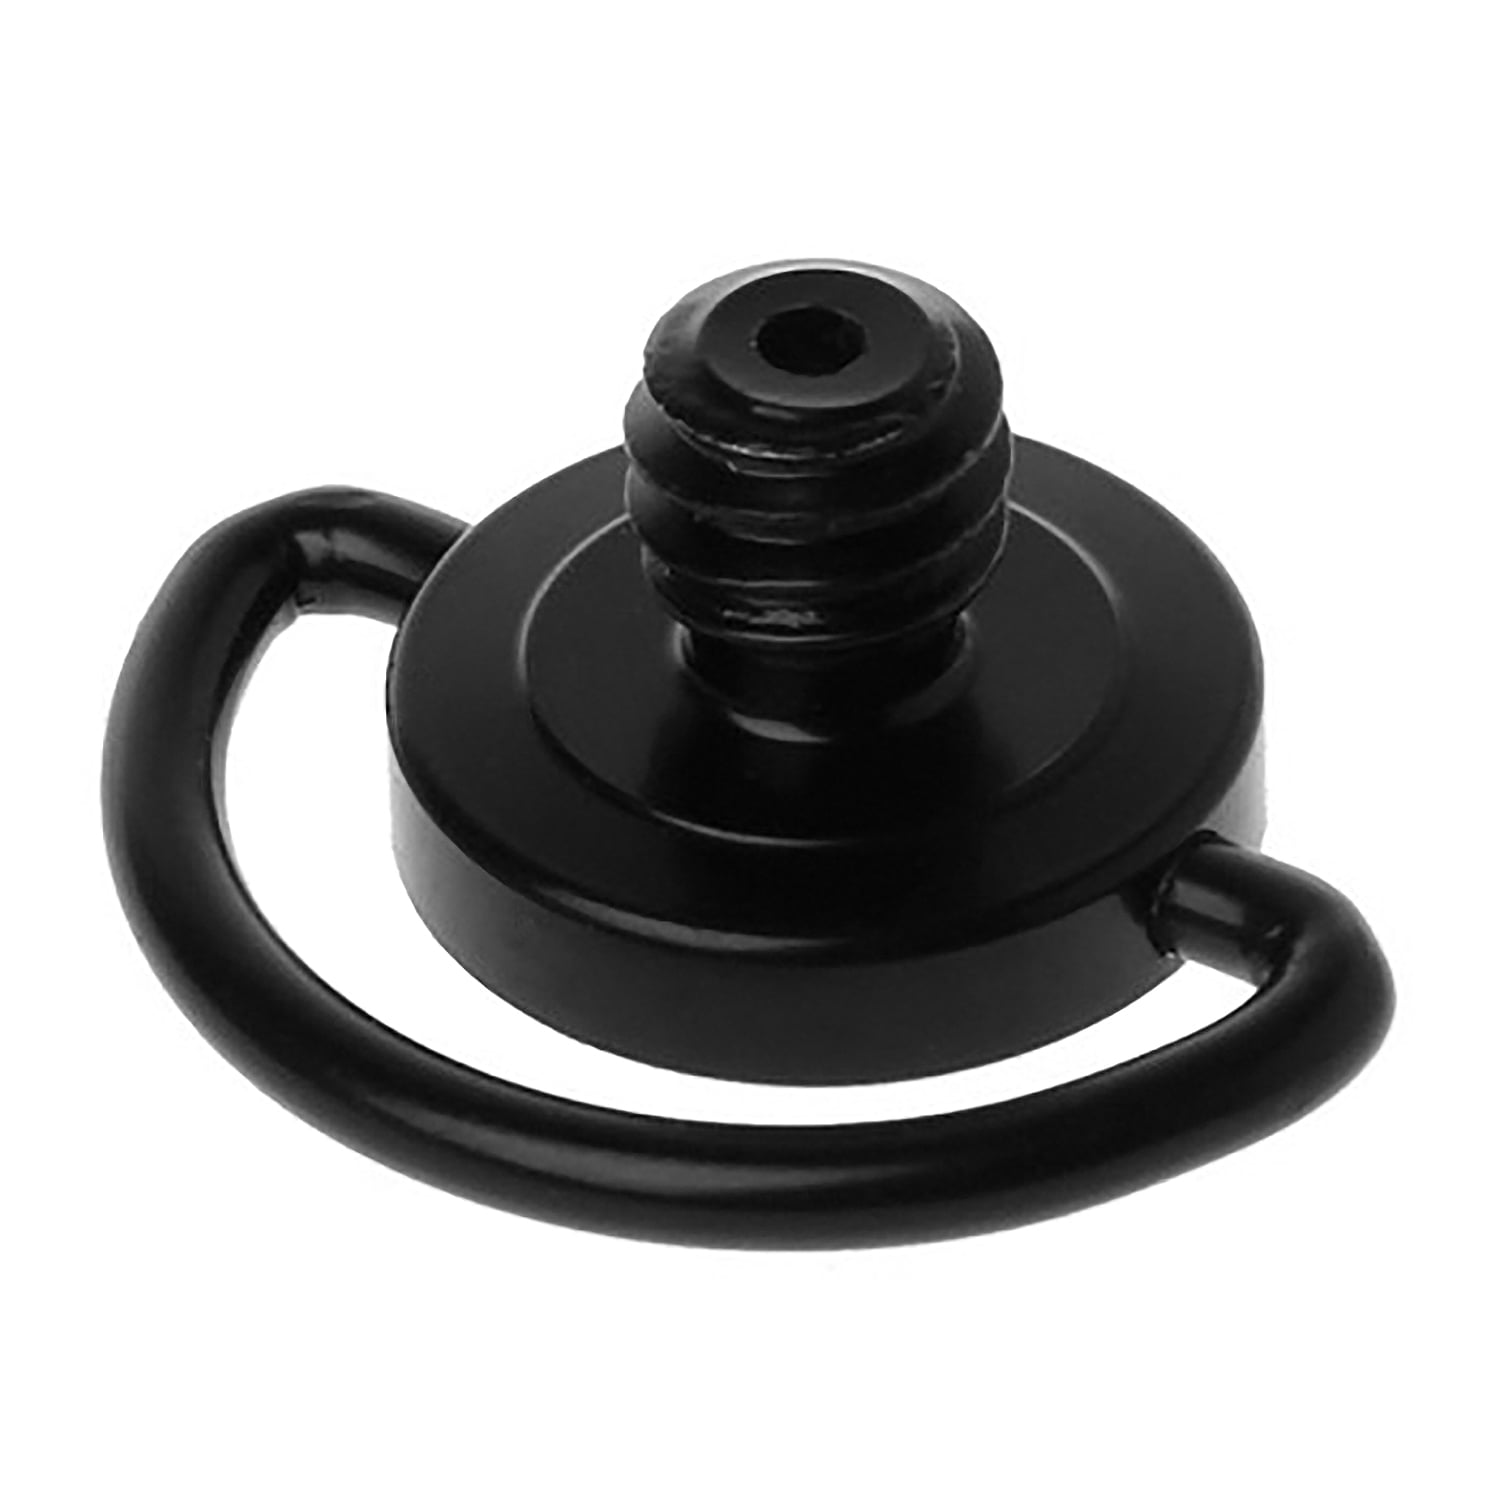 Brand New Genunie Logitech Replacement D-Ring for UE Boom or UE Megaboom